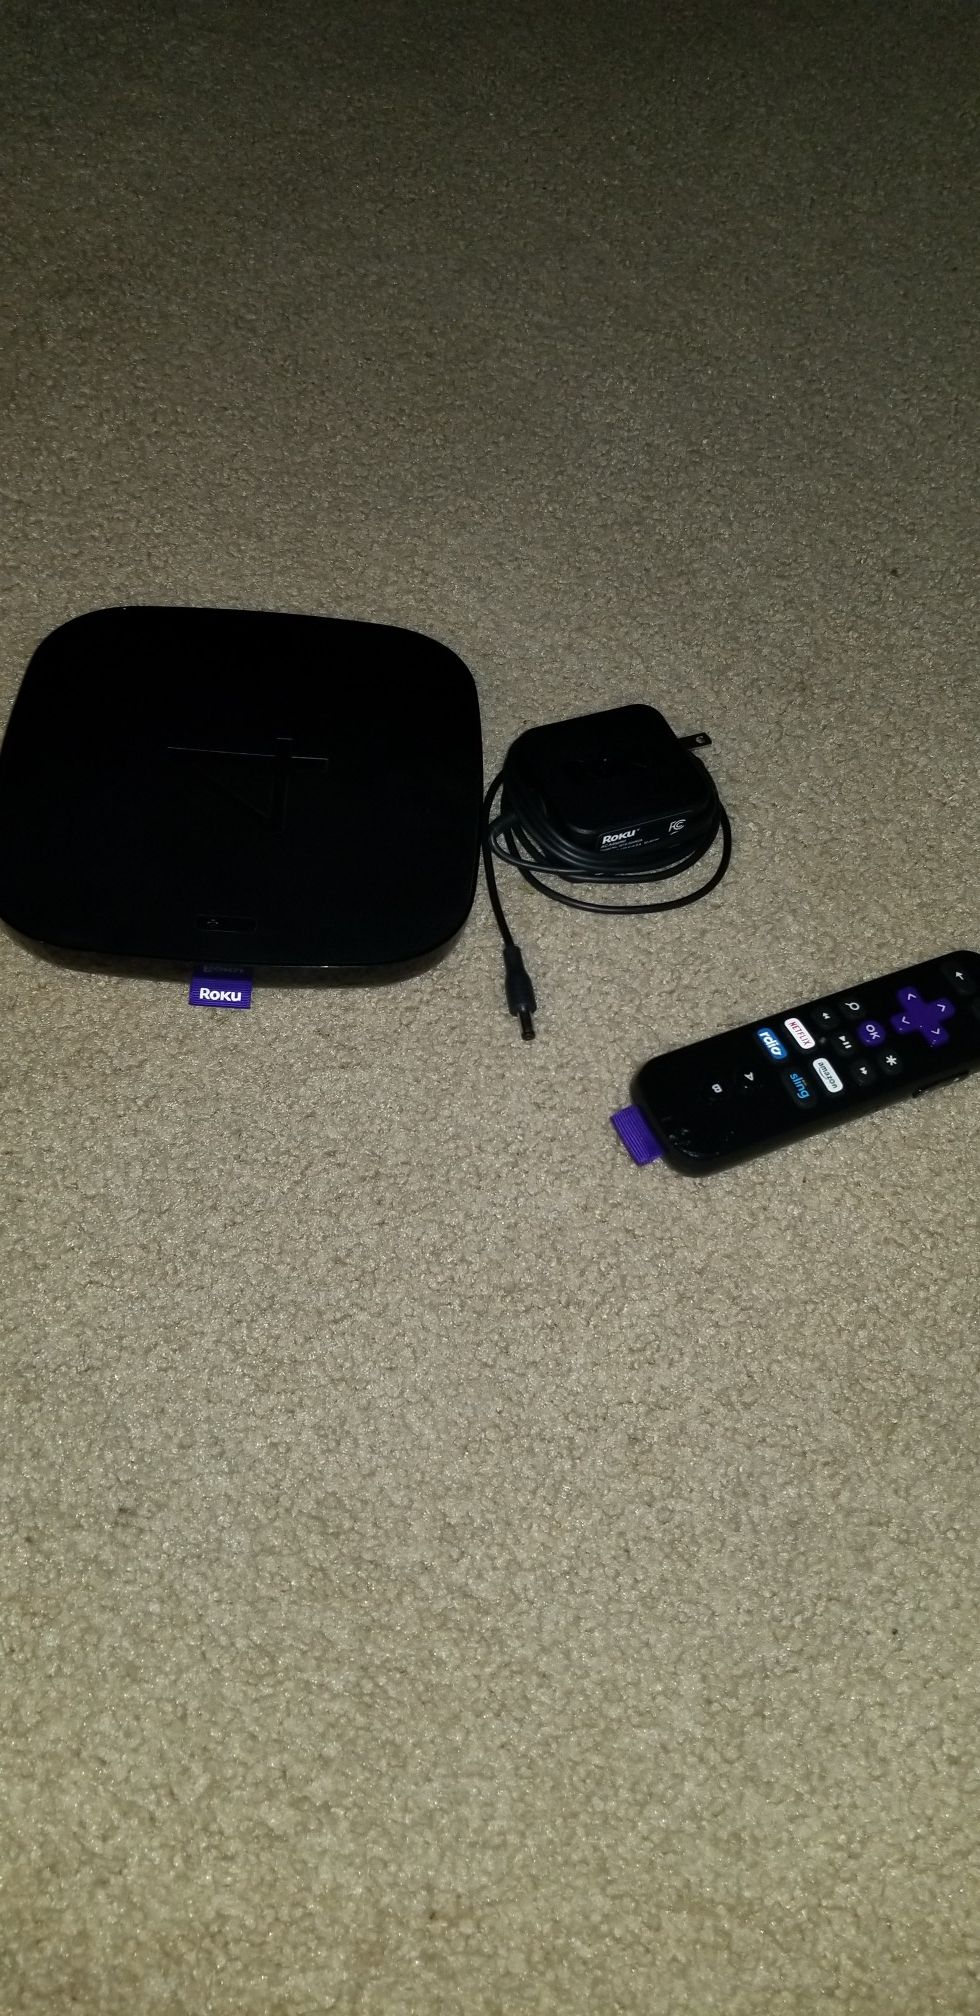 Roku 4 | HD and 4K UHD Streaming Media Player with Enhanced Remote, Quad-Core Processor,Dual-Band Wi-Fi, Ethernet, and USB Port